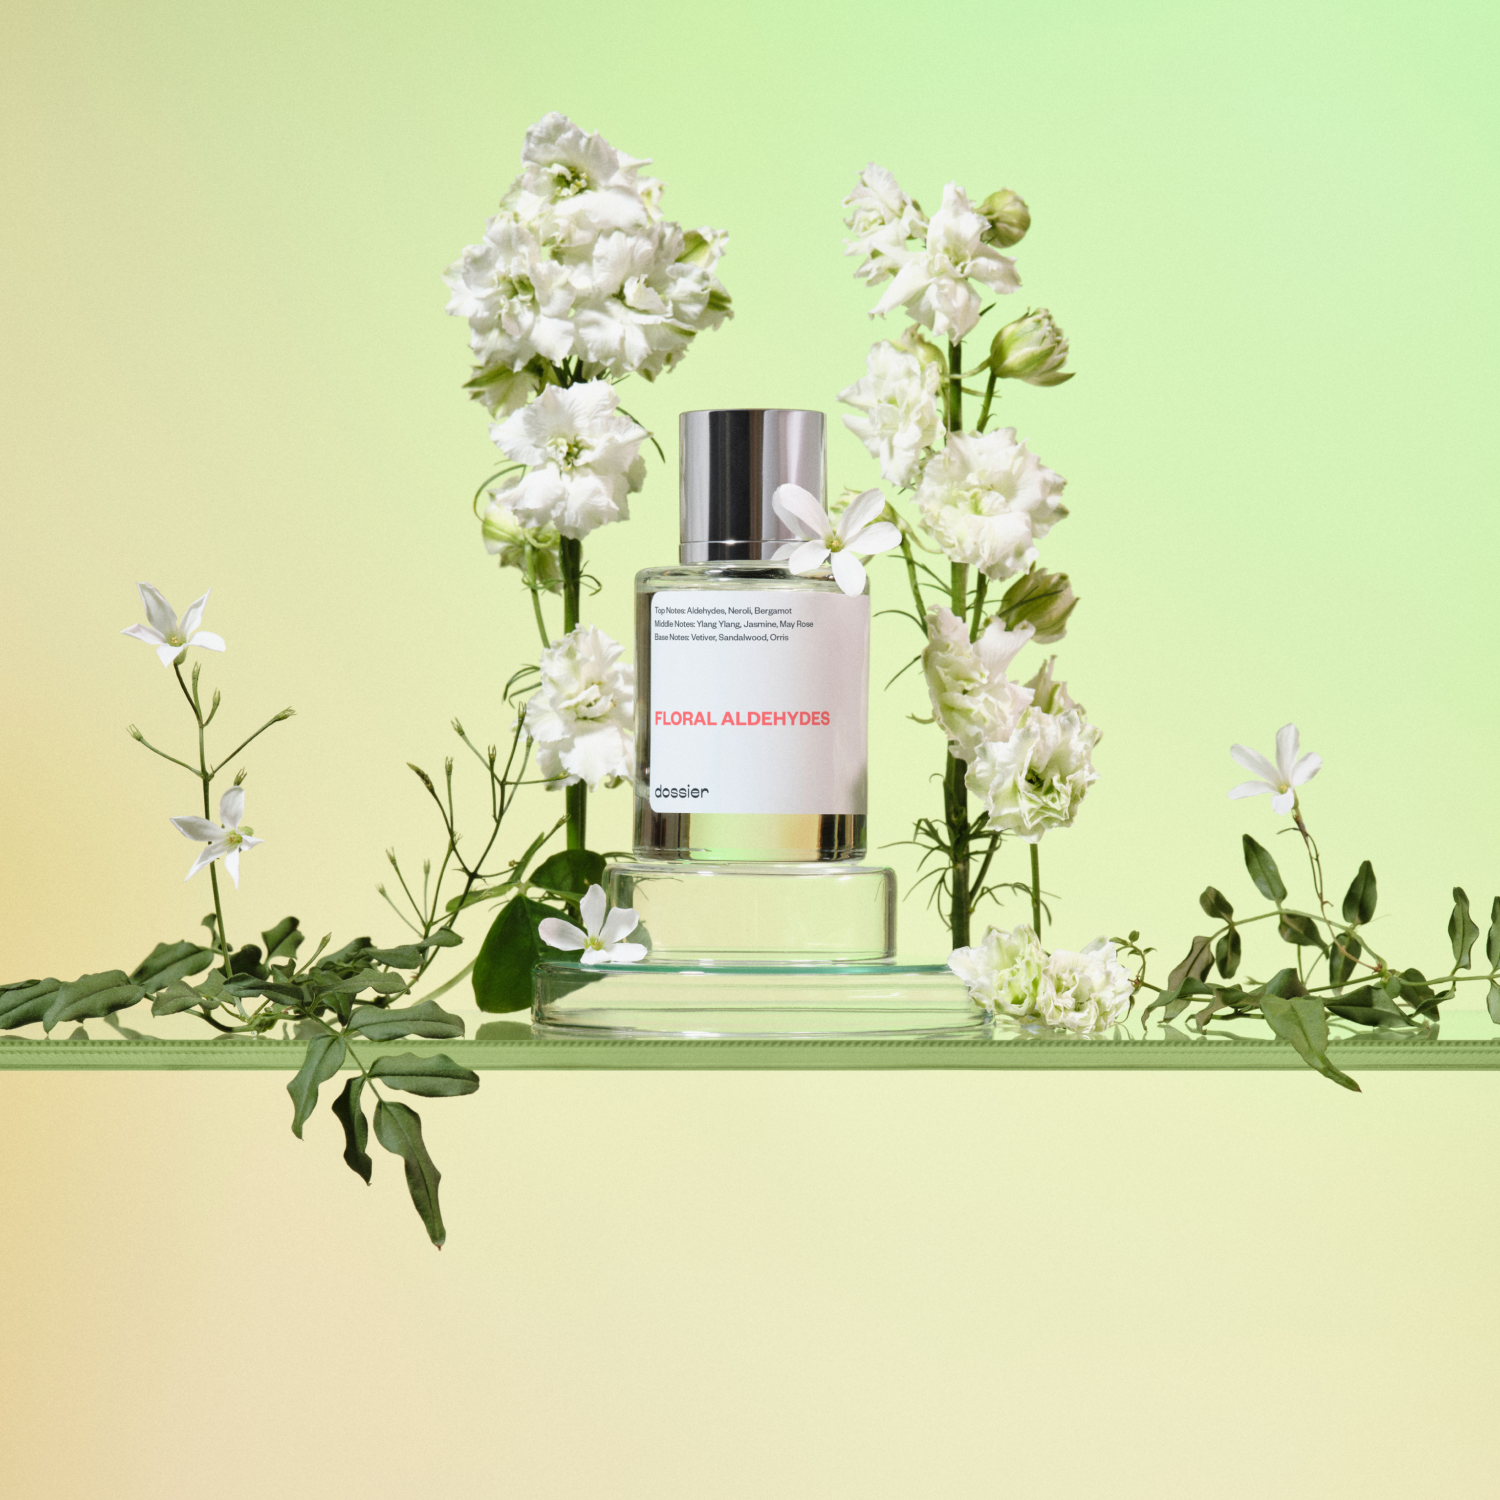 Dossier | Floral 3 Womens Perfume | Inspired by Chanel No. 5 Fragrance